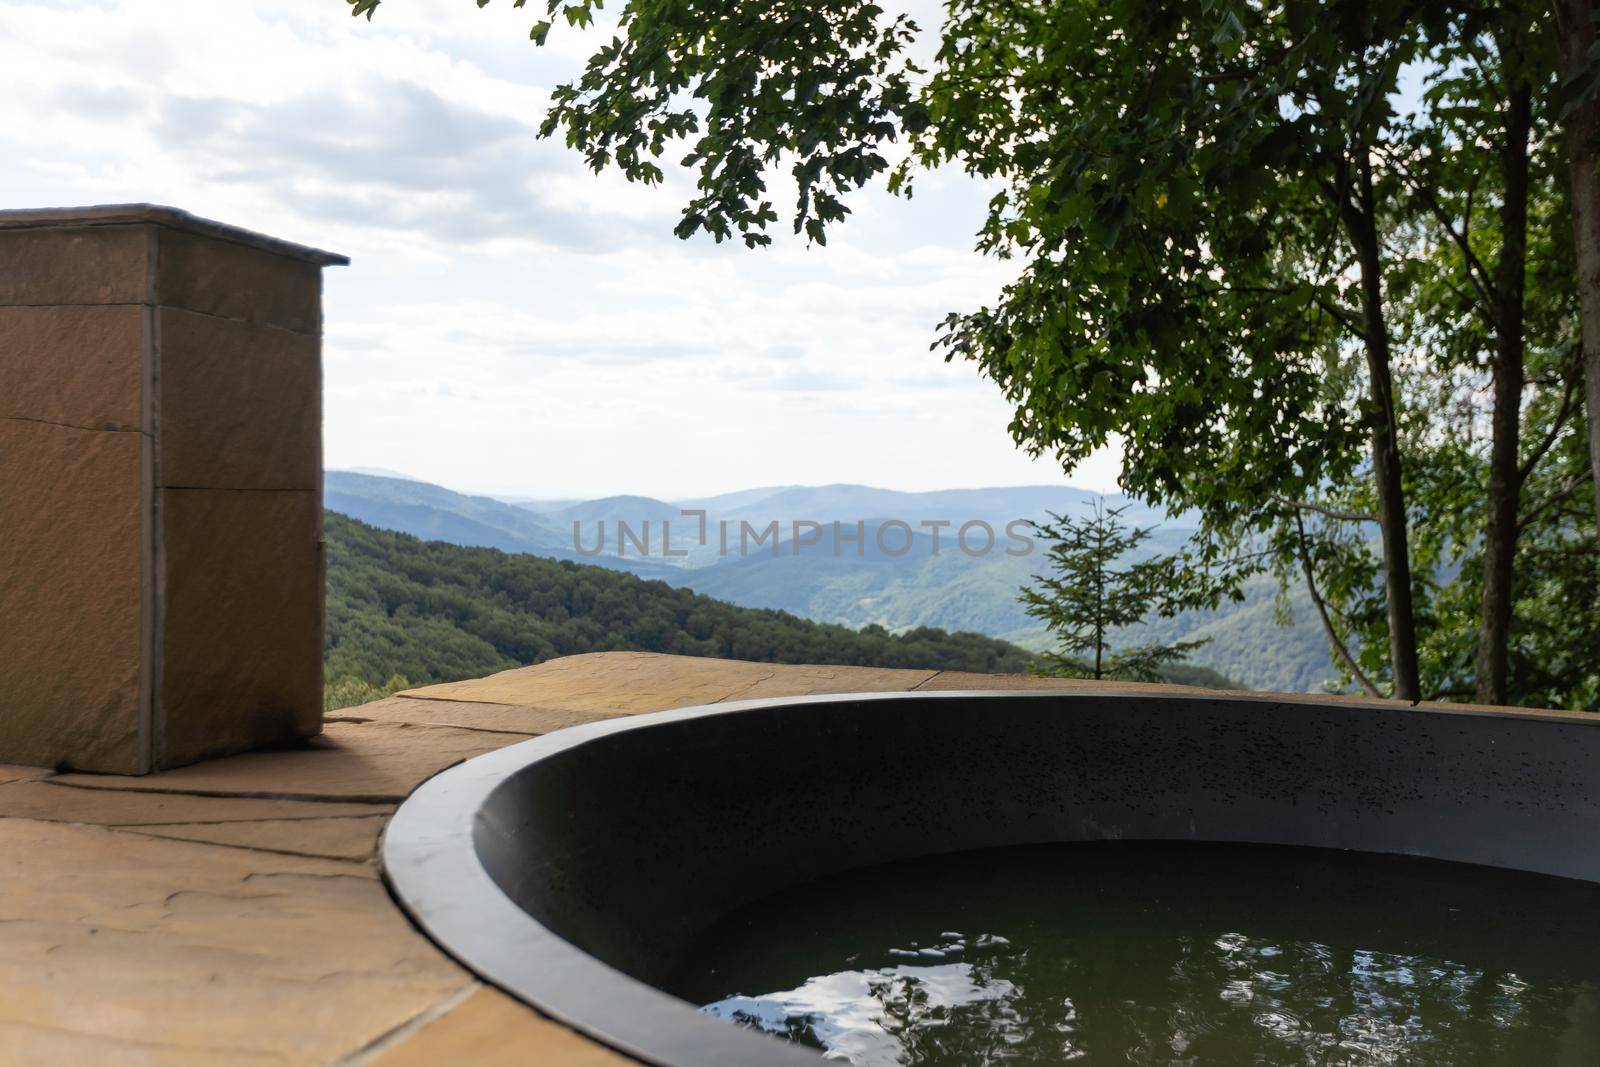 Wooden hot vat on terrace at mountains. vacation concept with hot bath outside. summer.